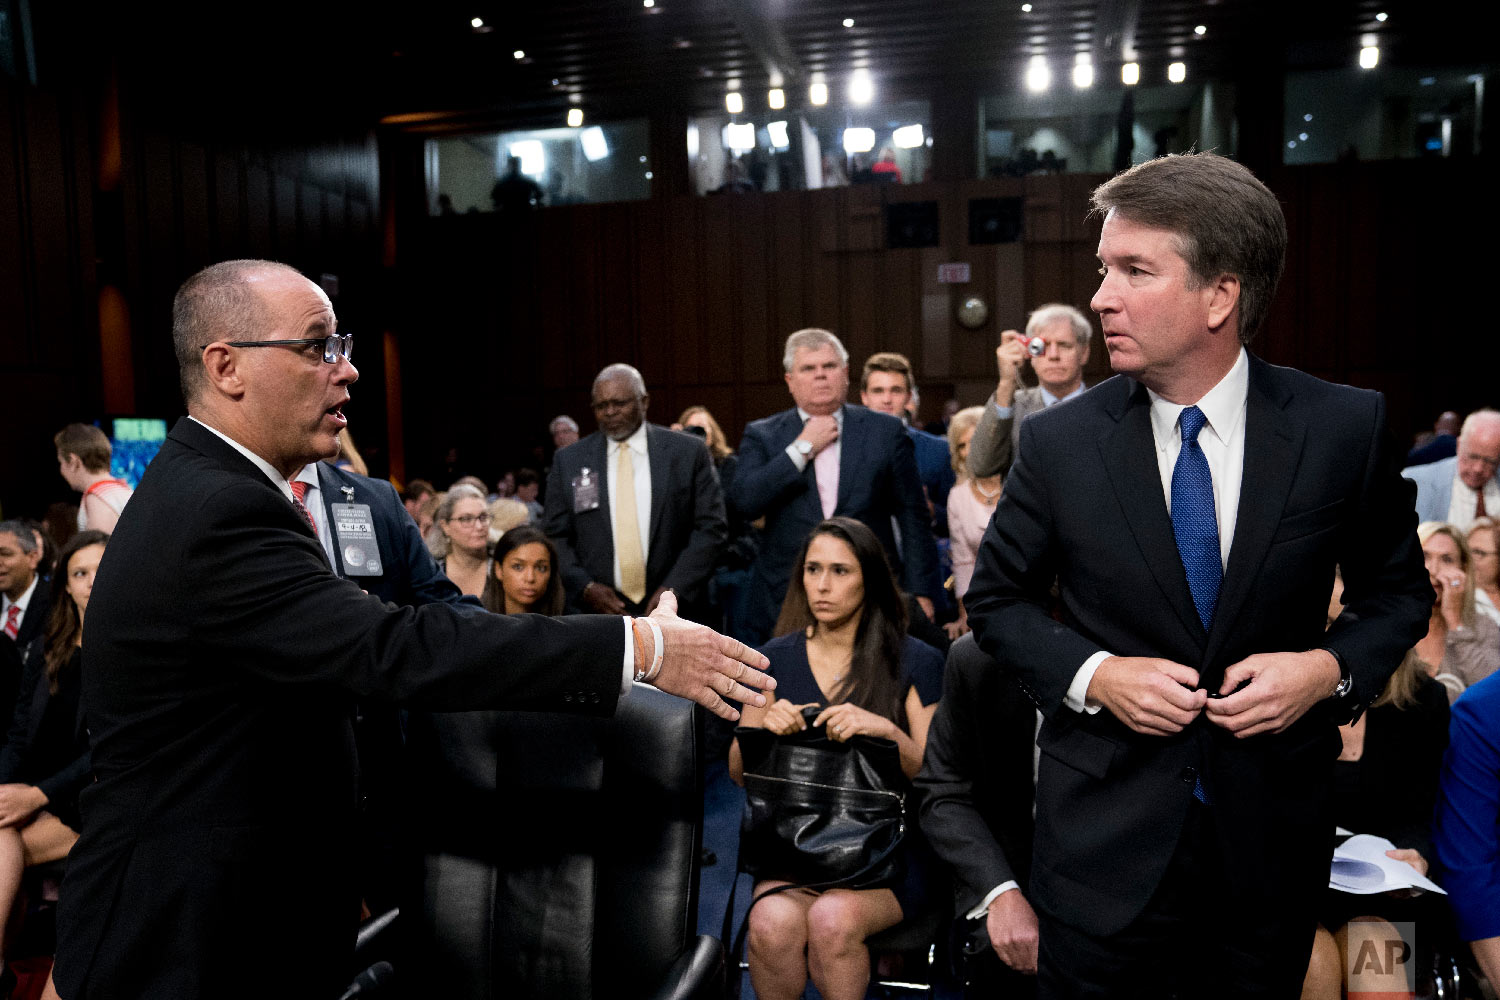  Fred Guttenberg, left, the father of Jamie Guttenberg, who was killed in the high school shooting in Parkland, Fla., attempts to shake hands with Brett Kavanaugh, President Donald Trump's Supreme Court nominee, as he leaves for a lunch break during 